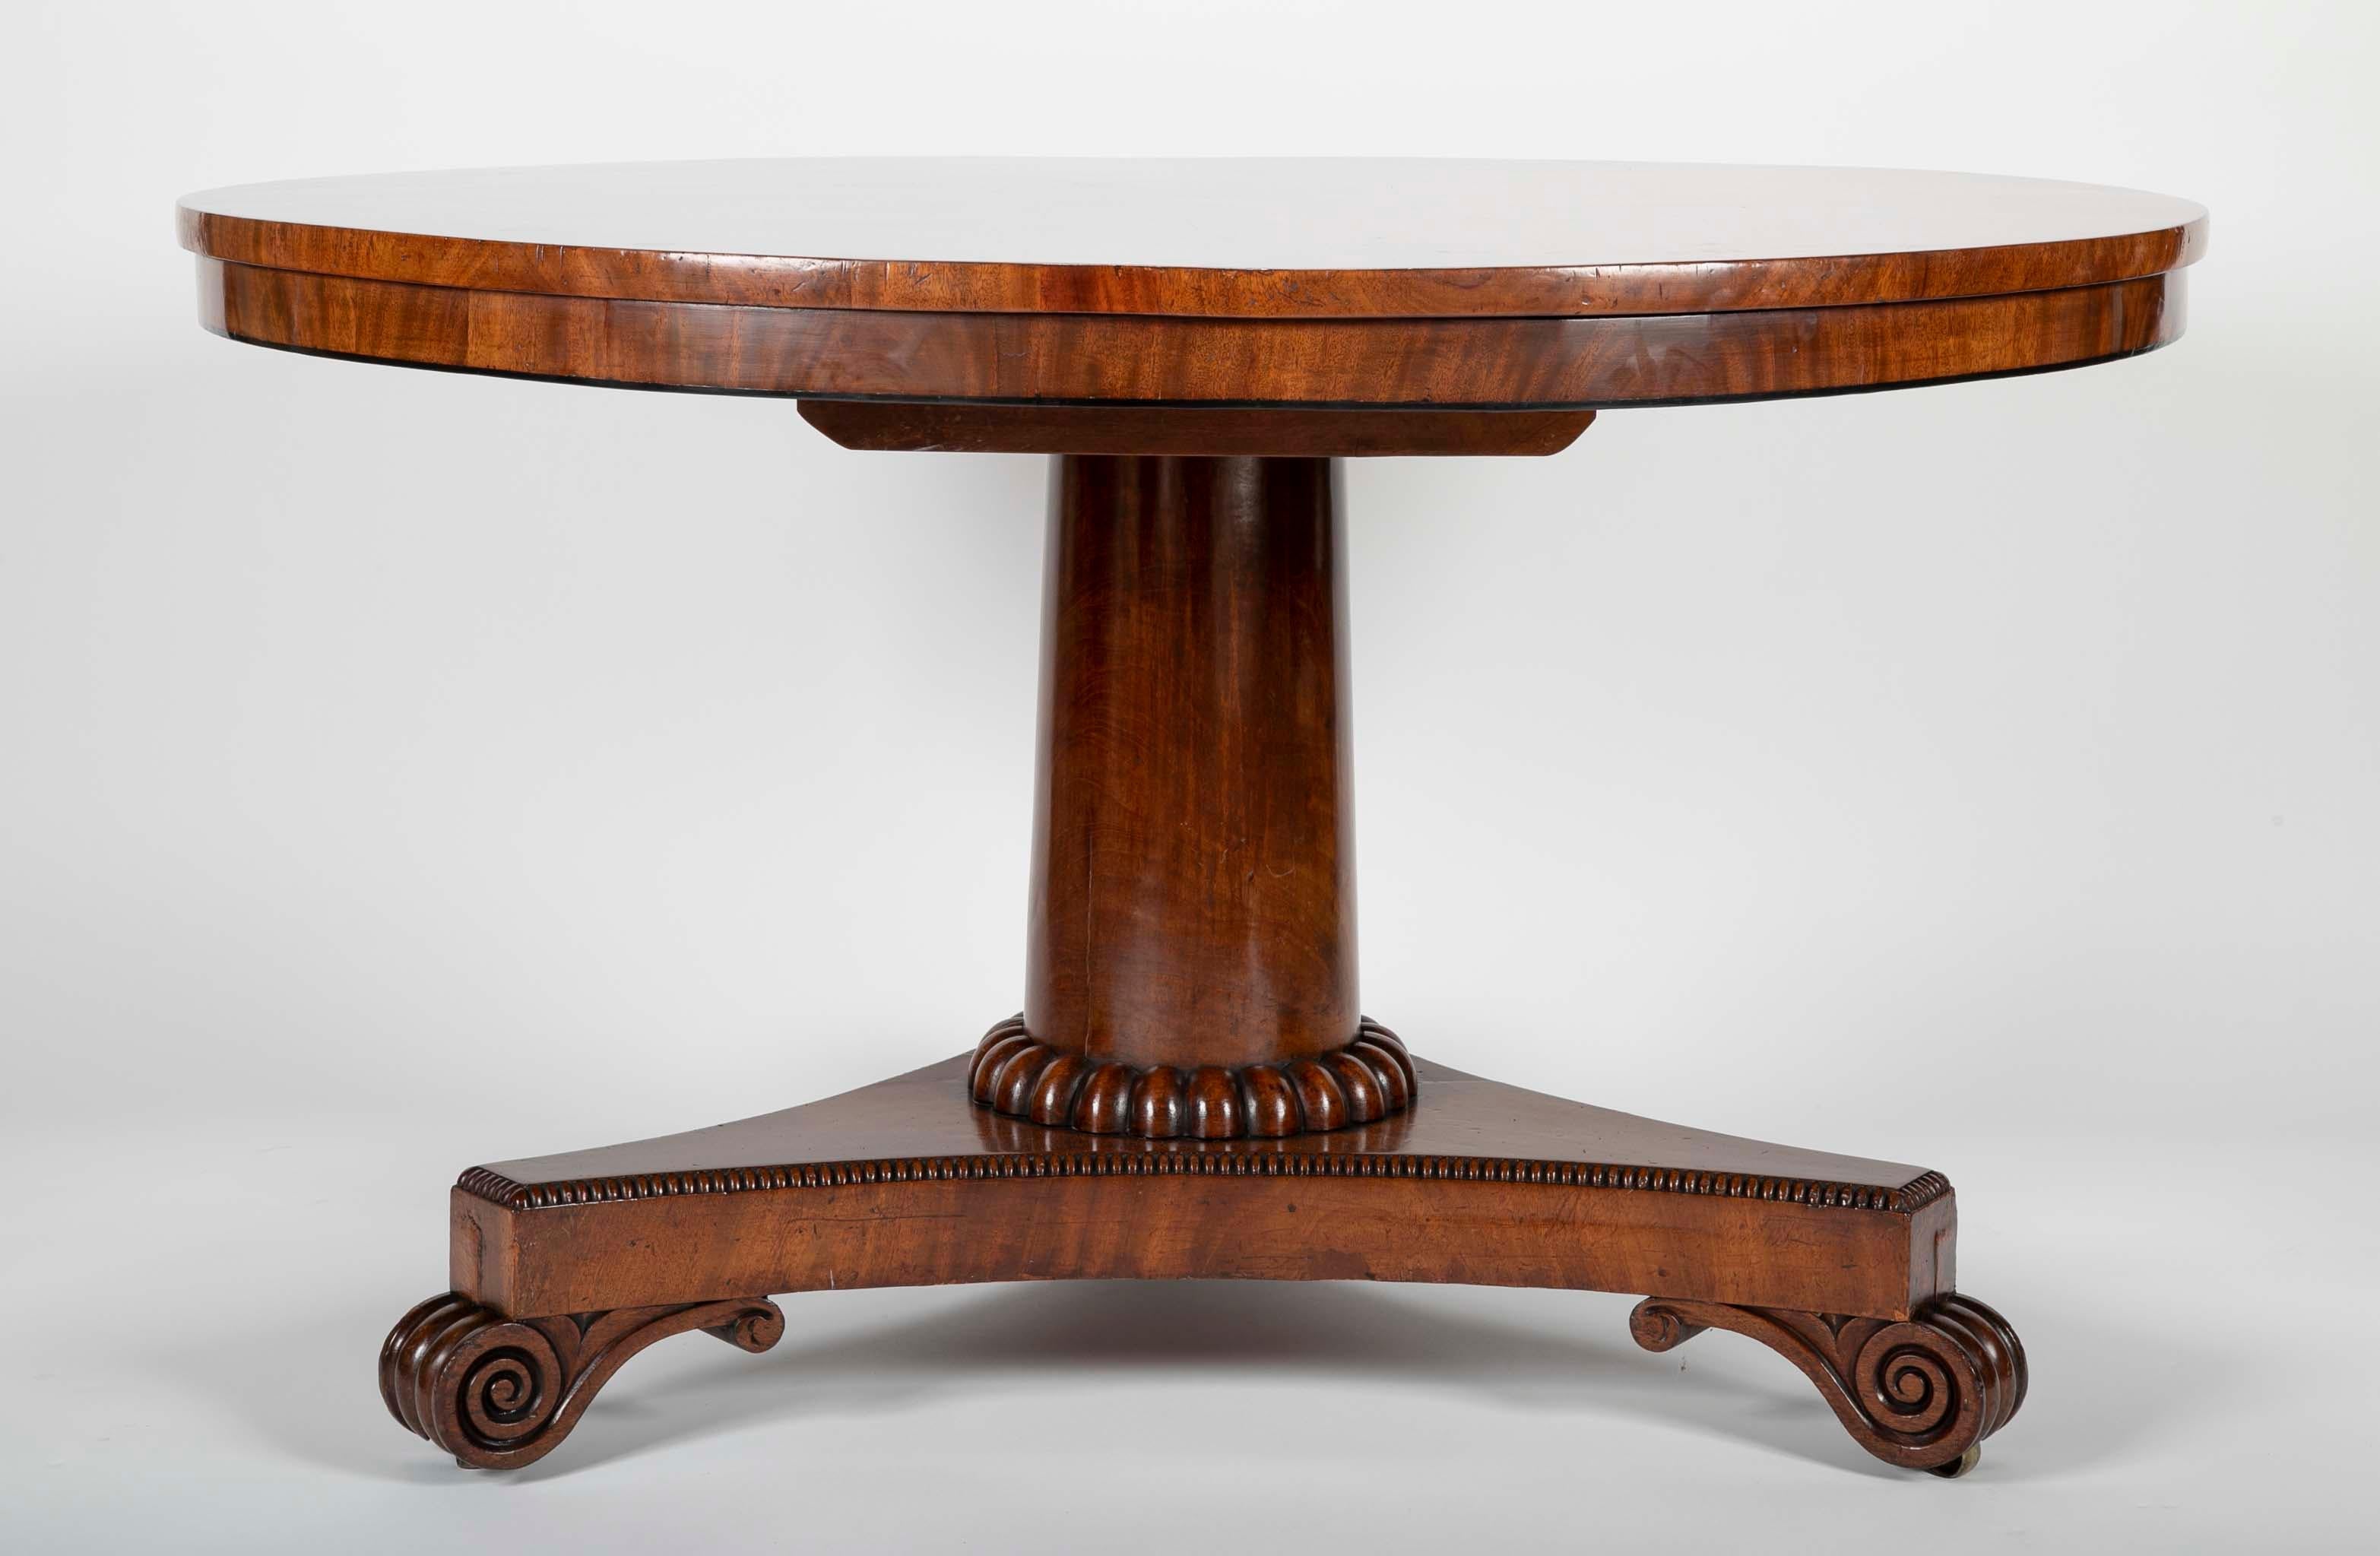 A crotch mahogany English Regency tilt-top table. The top rising on an unadorned single column from a gadrooned tripartite base raised on scroll feet.